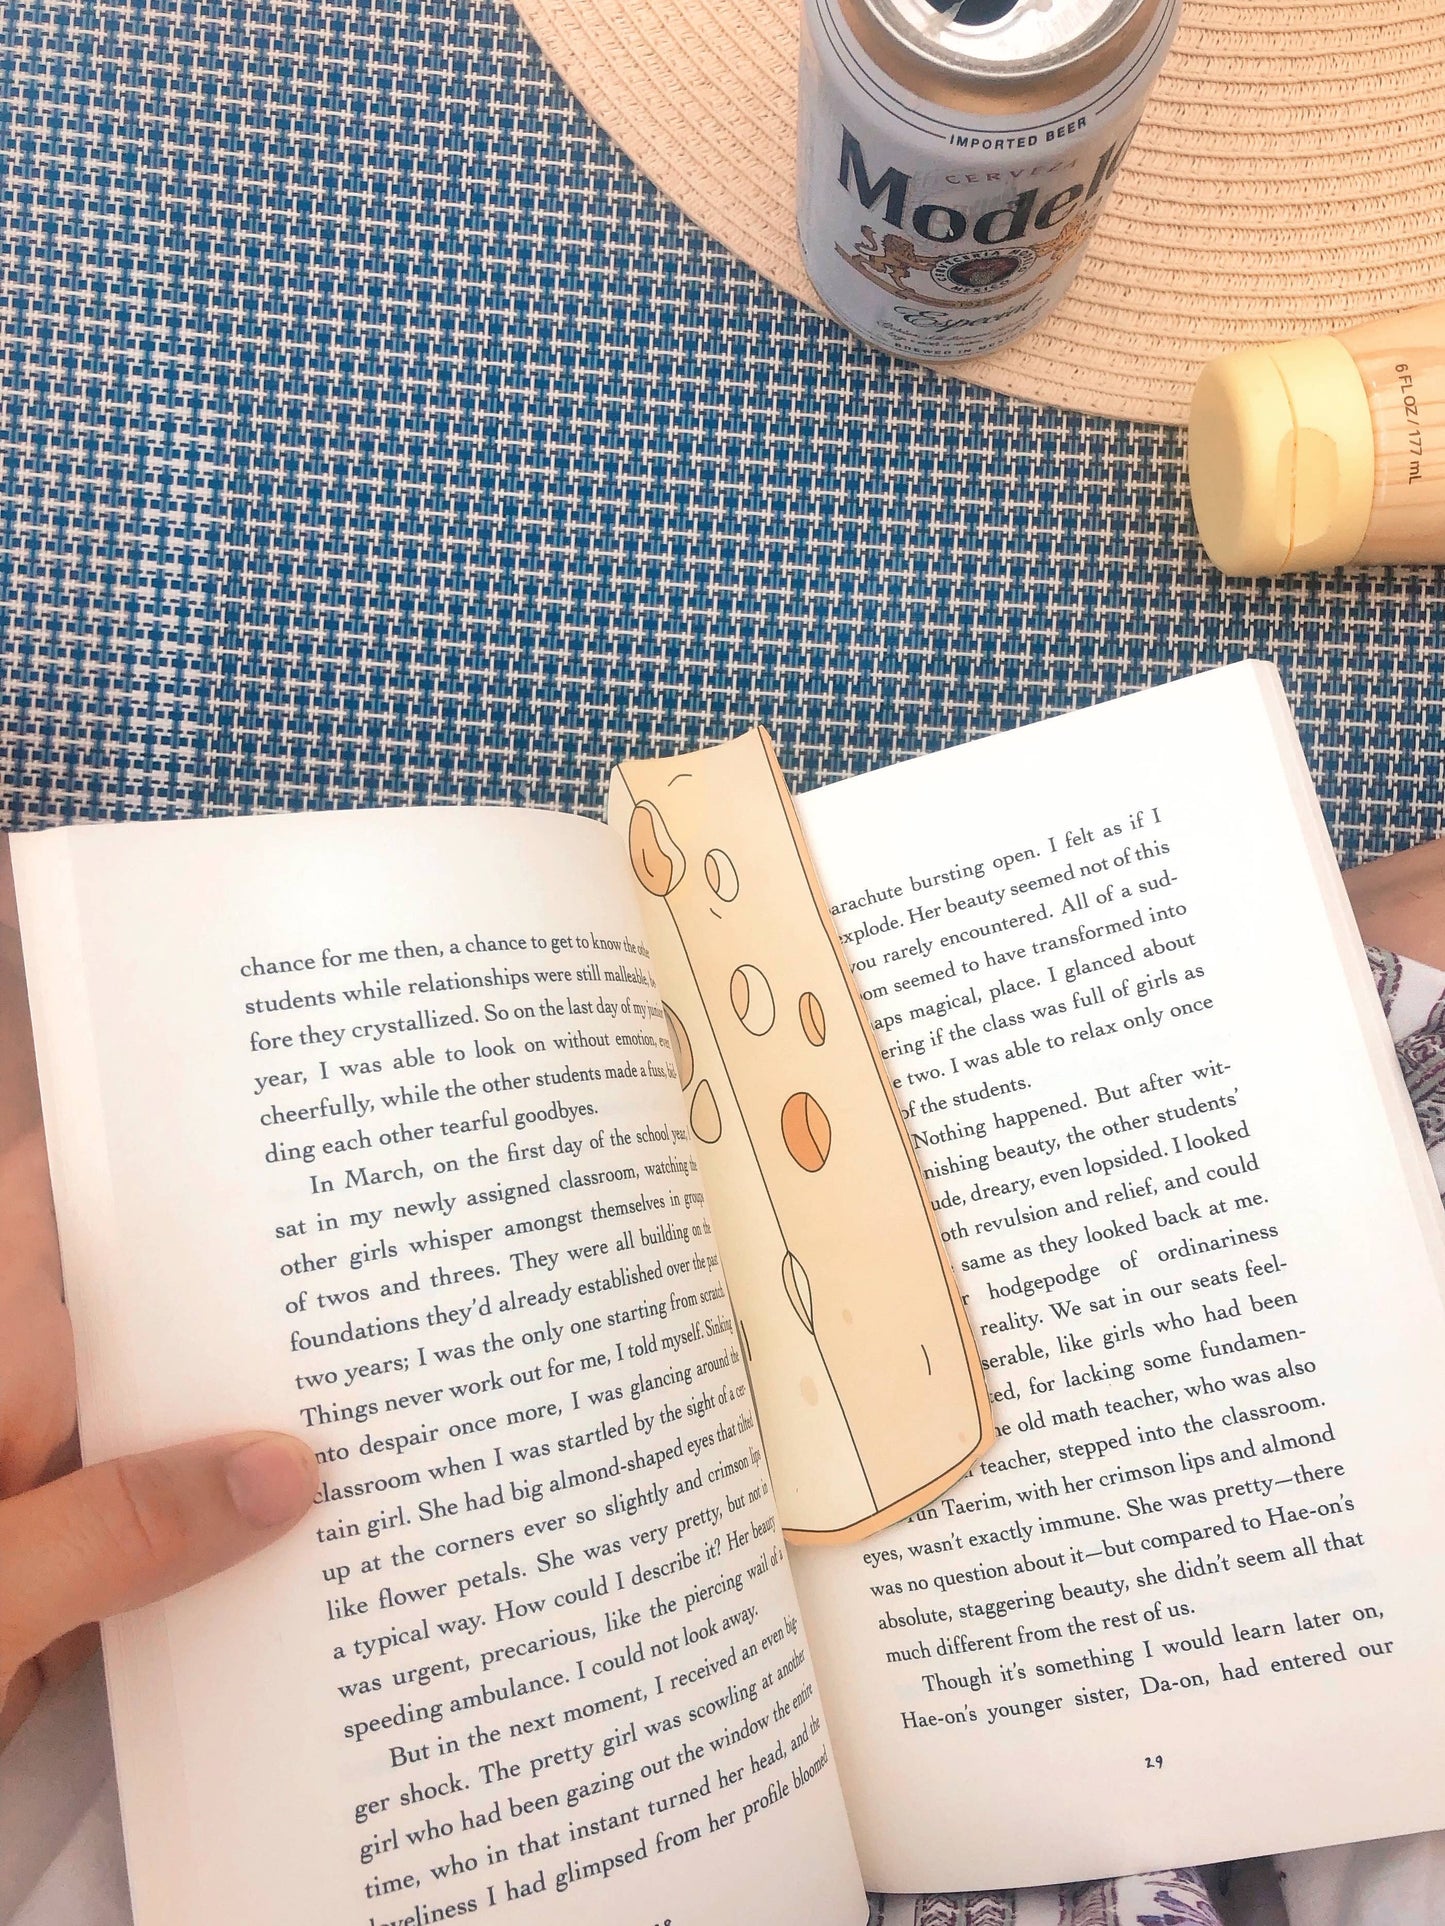 Block of cheese bookmark being used inside book 